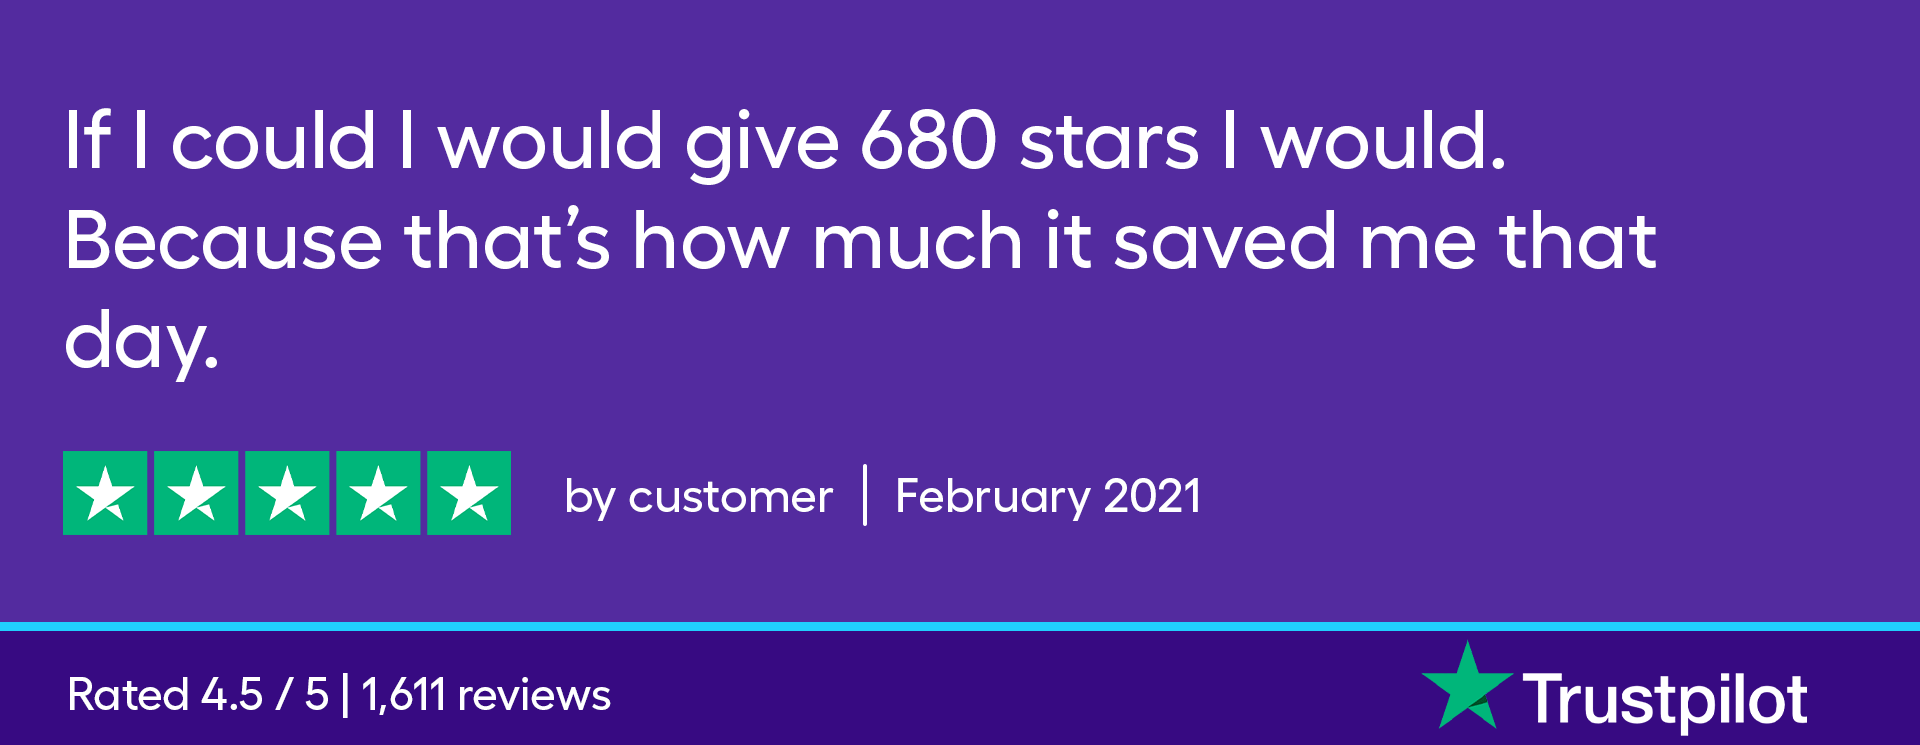 If I could I would give 680 stars to SingleCare because that is how much it saved me that day!